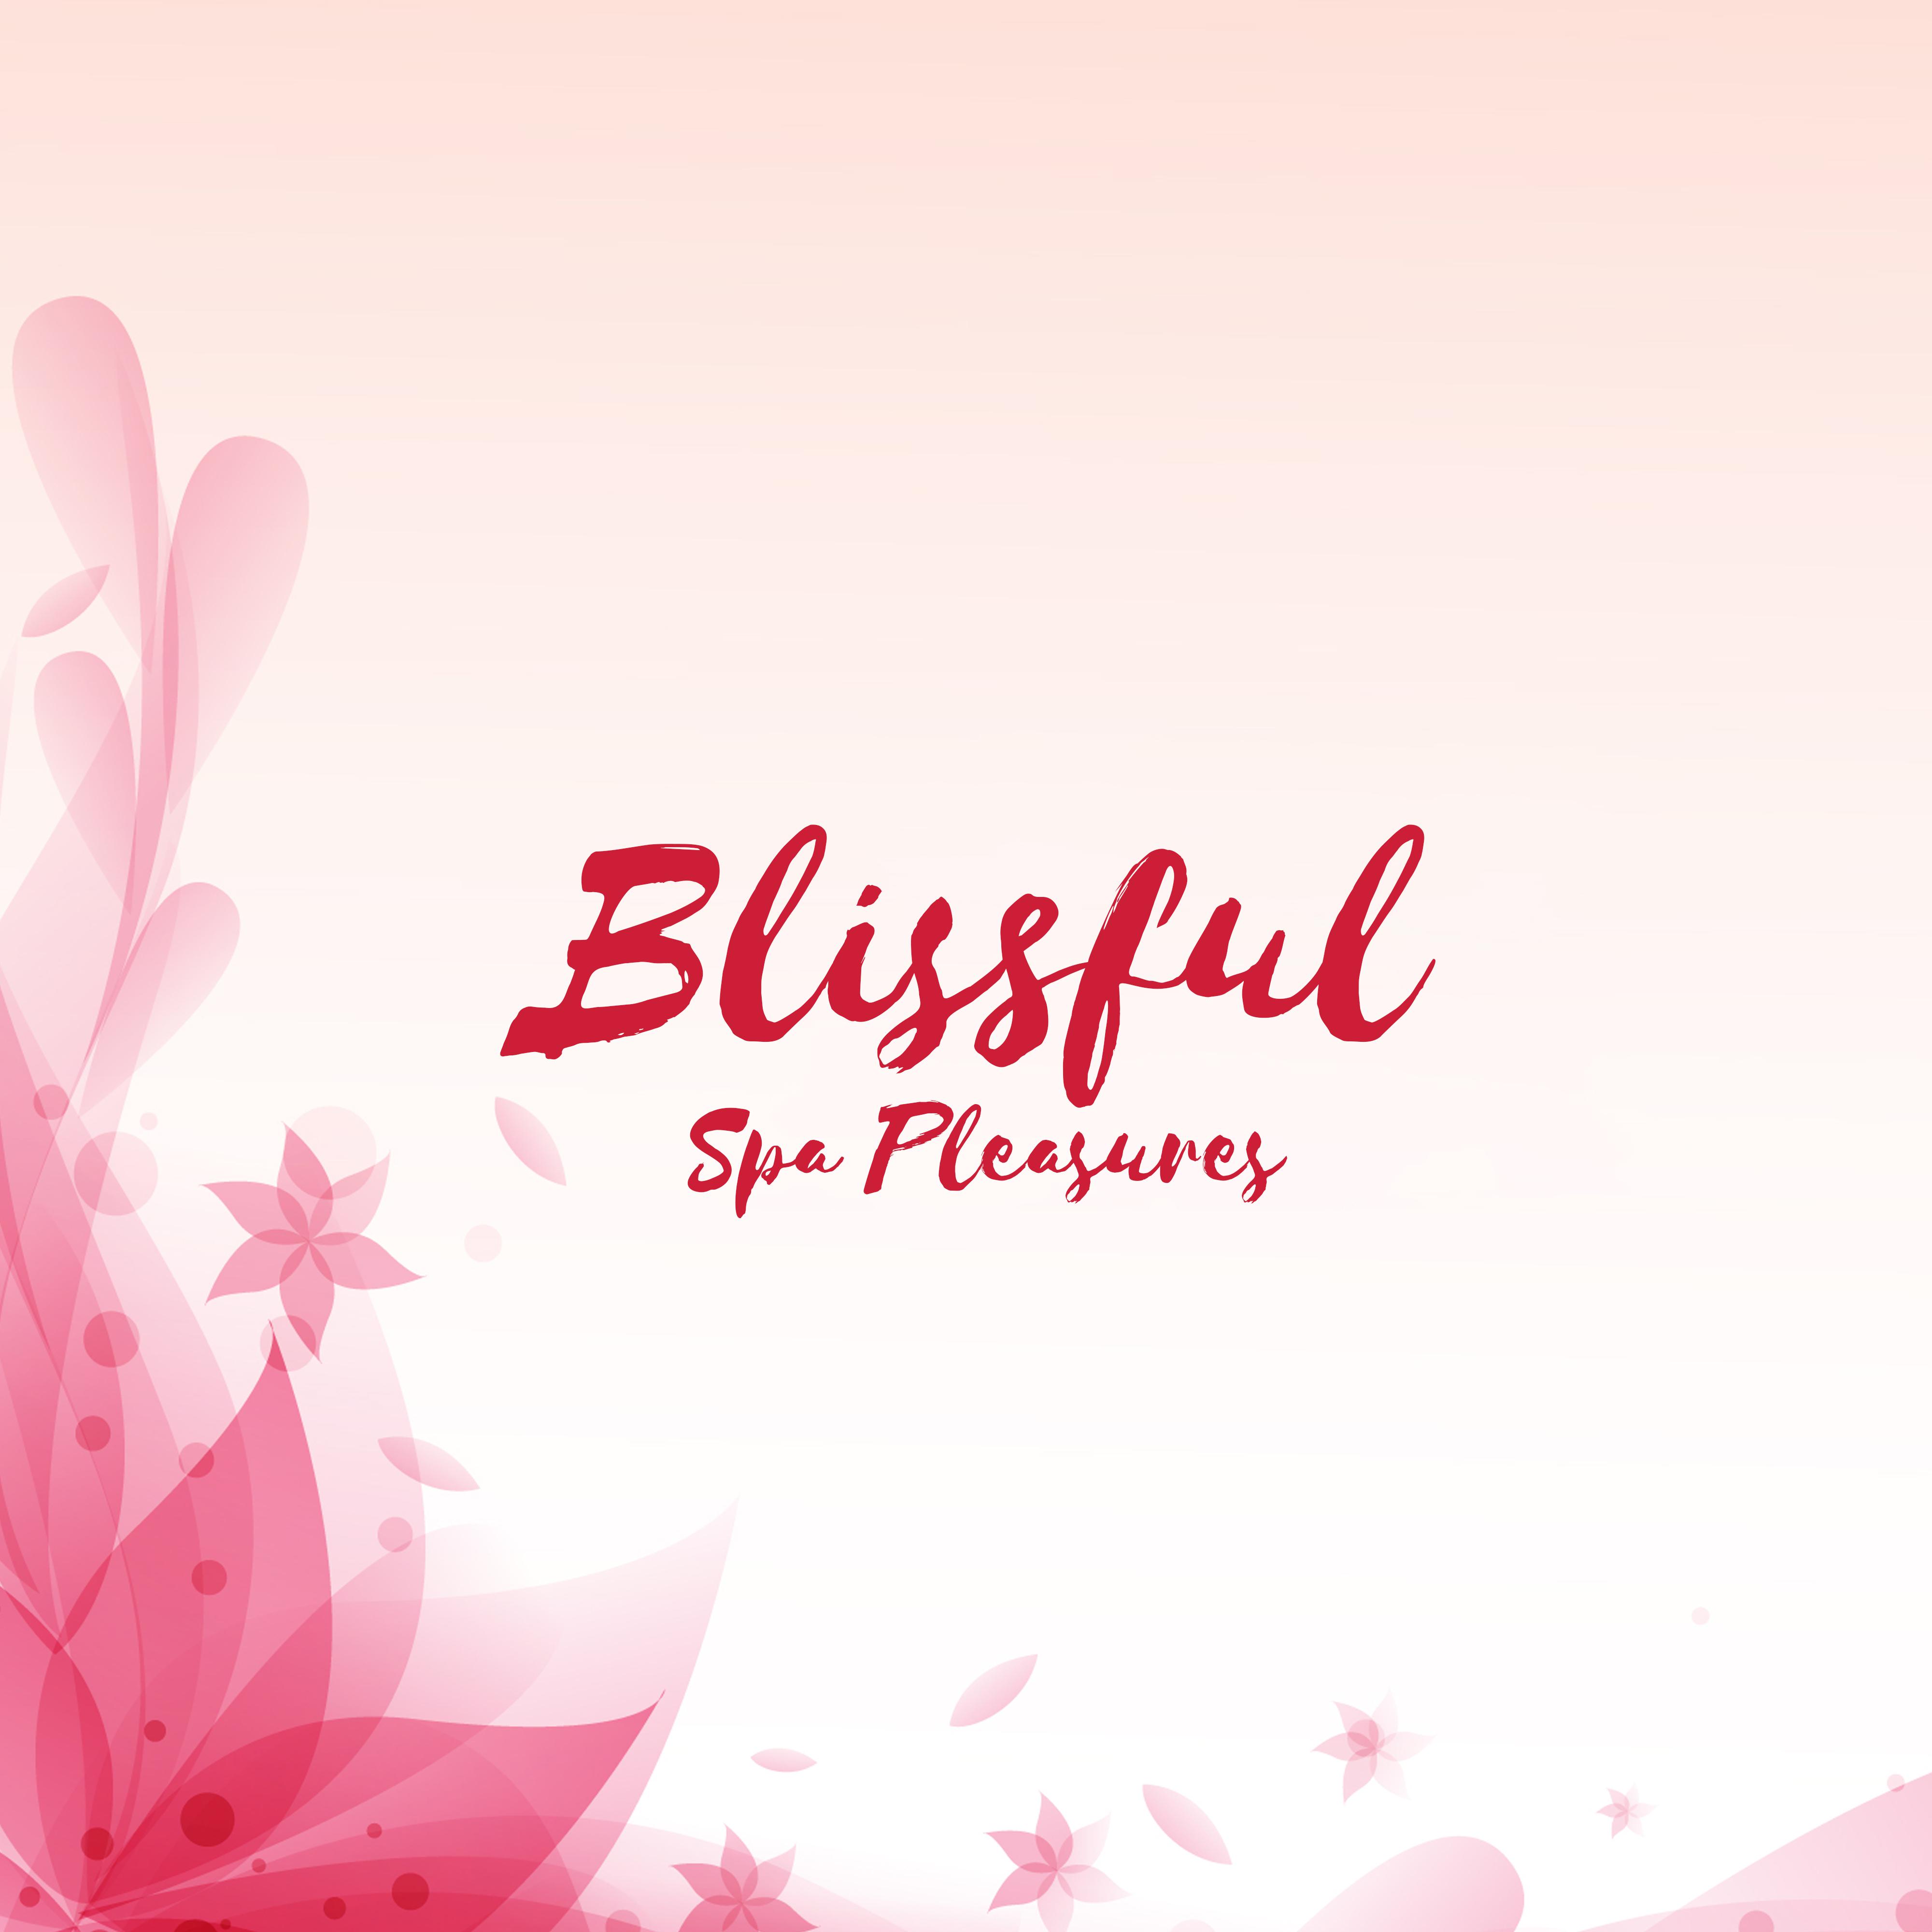 Blissful Spa Pleasures – Compilation of 15 New Age Songs with Nature Sounds for Spa & Wellness Salon, Massage Therapy & Sauna